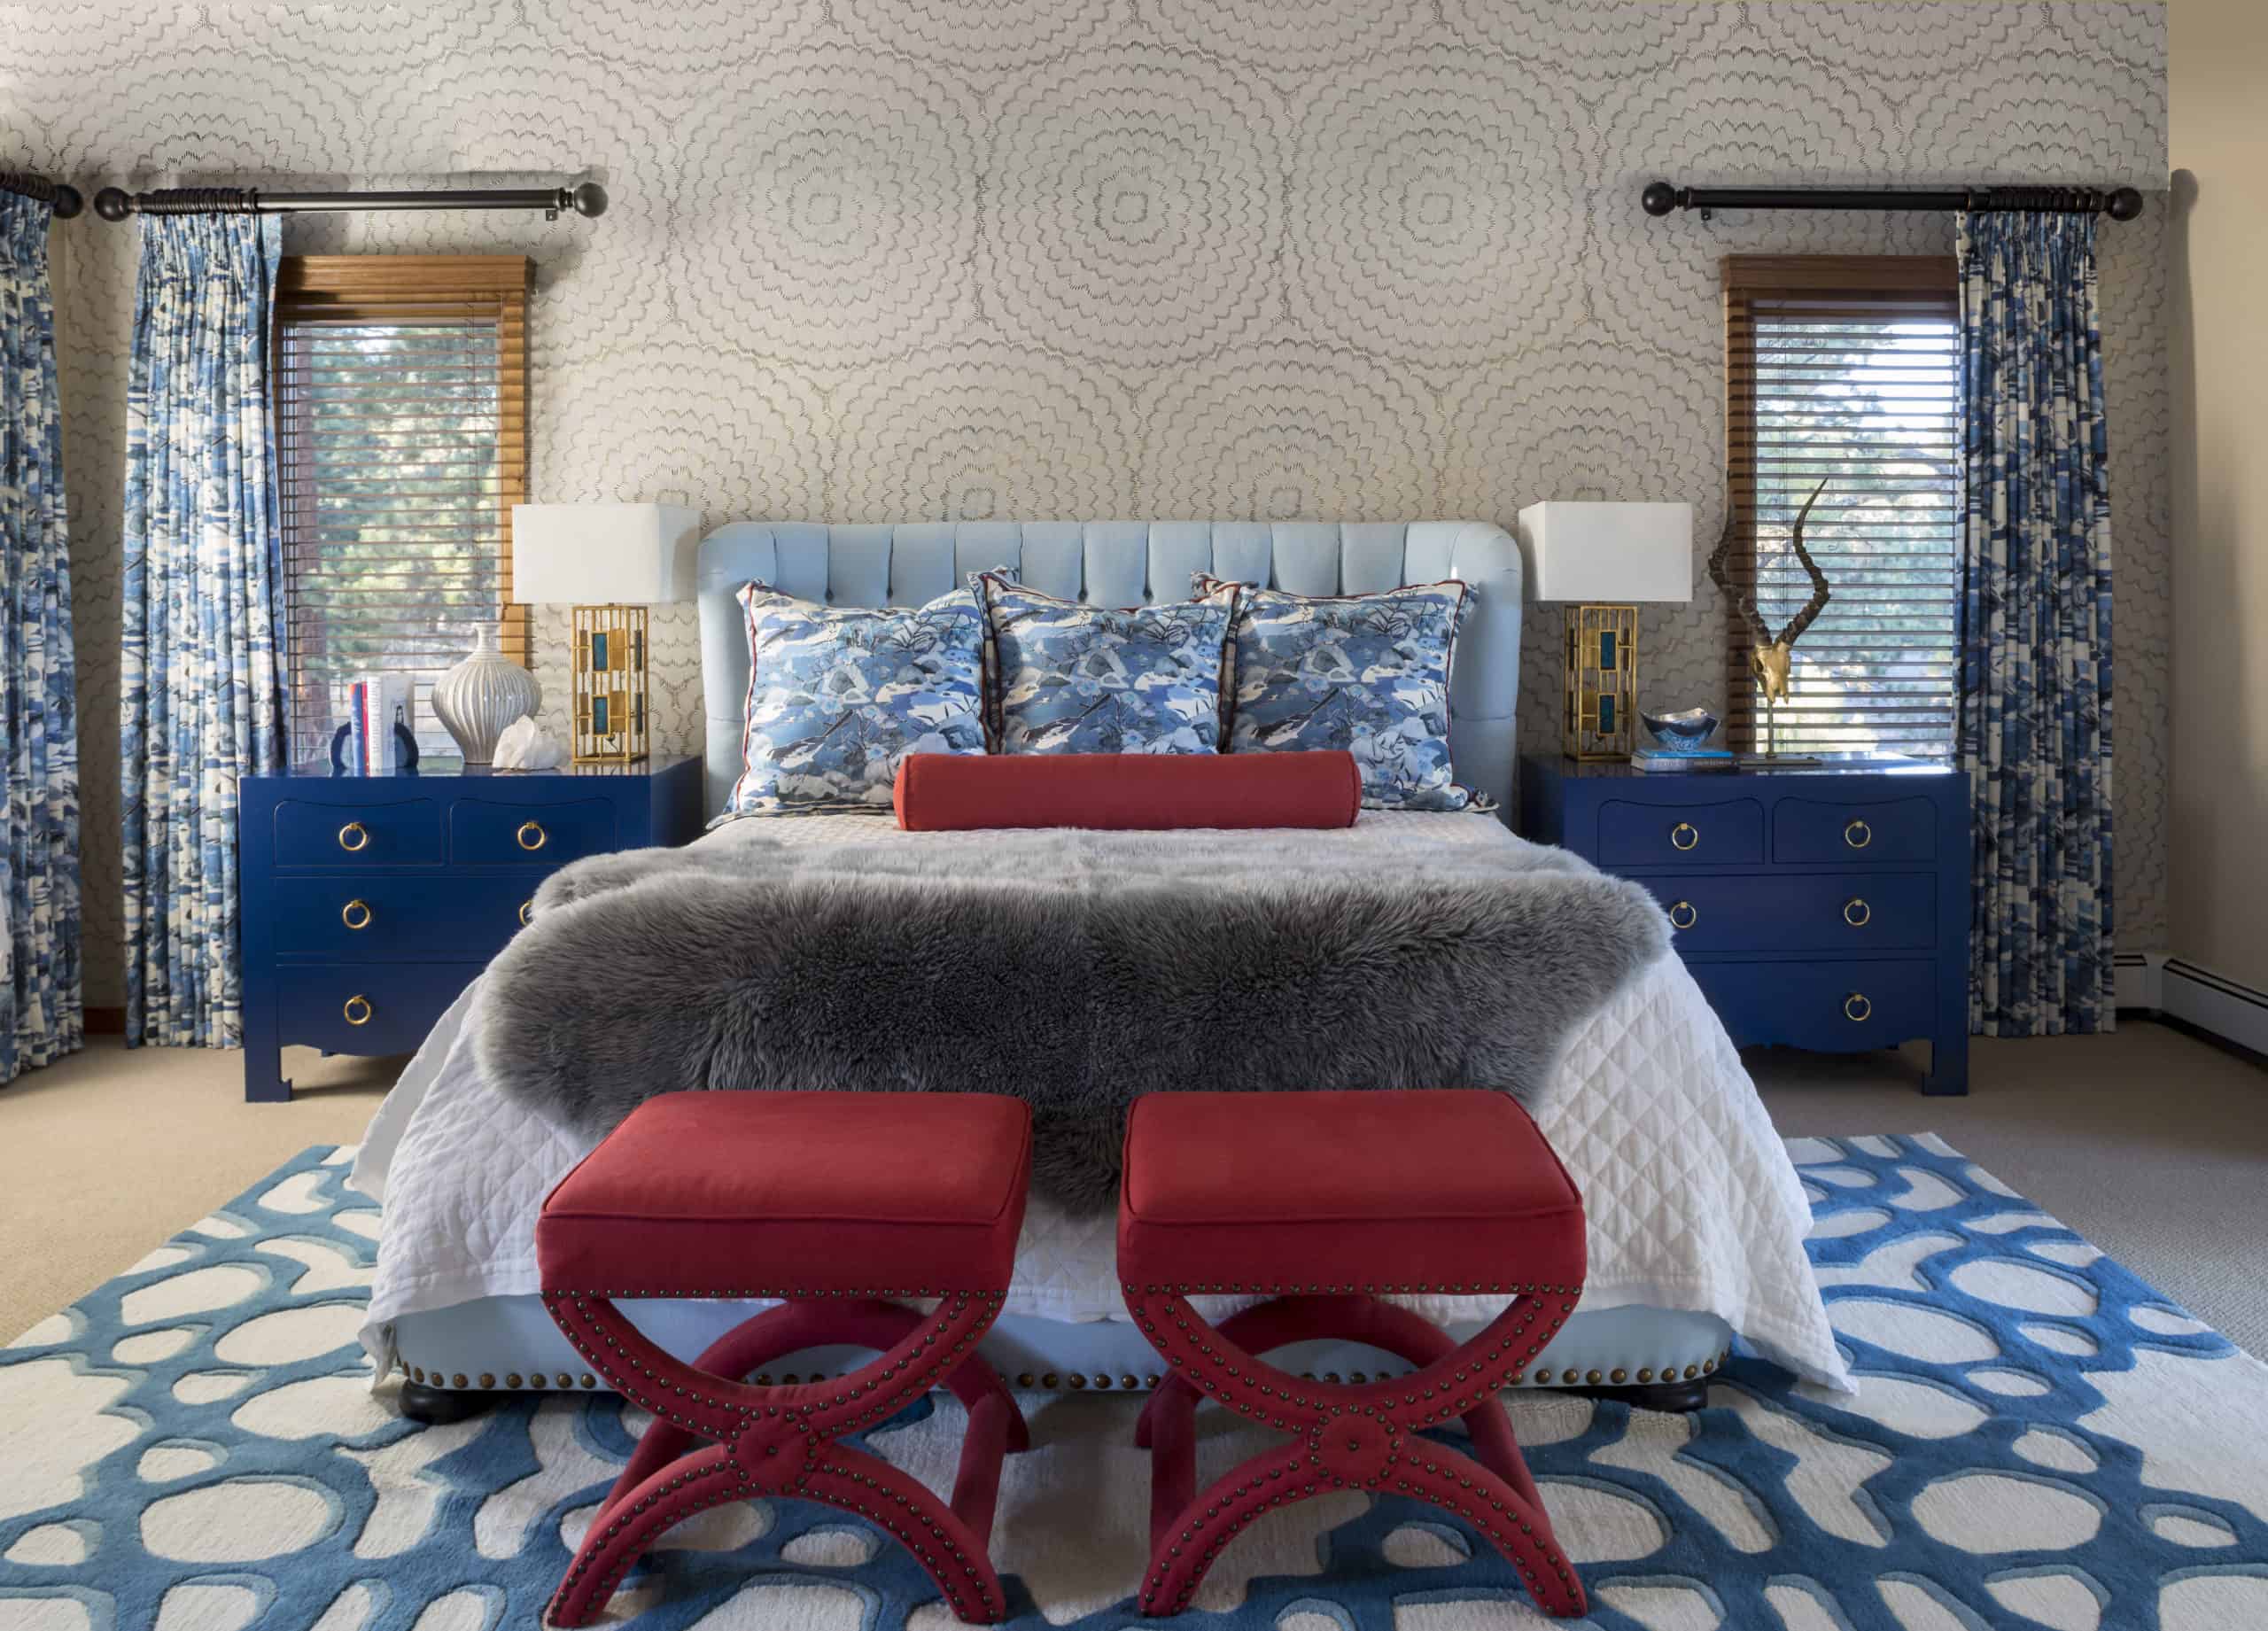 Creamy textured bedroom wallcovering, custom bedframe and red upholstered stools